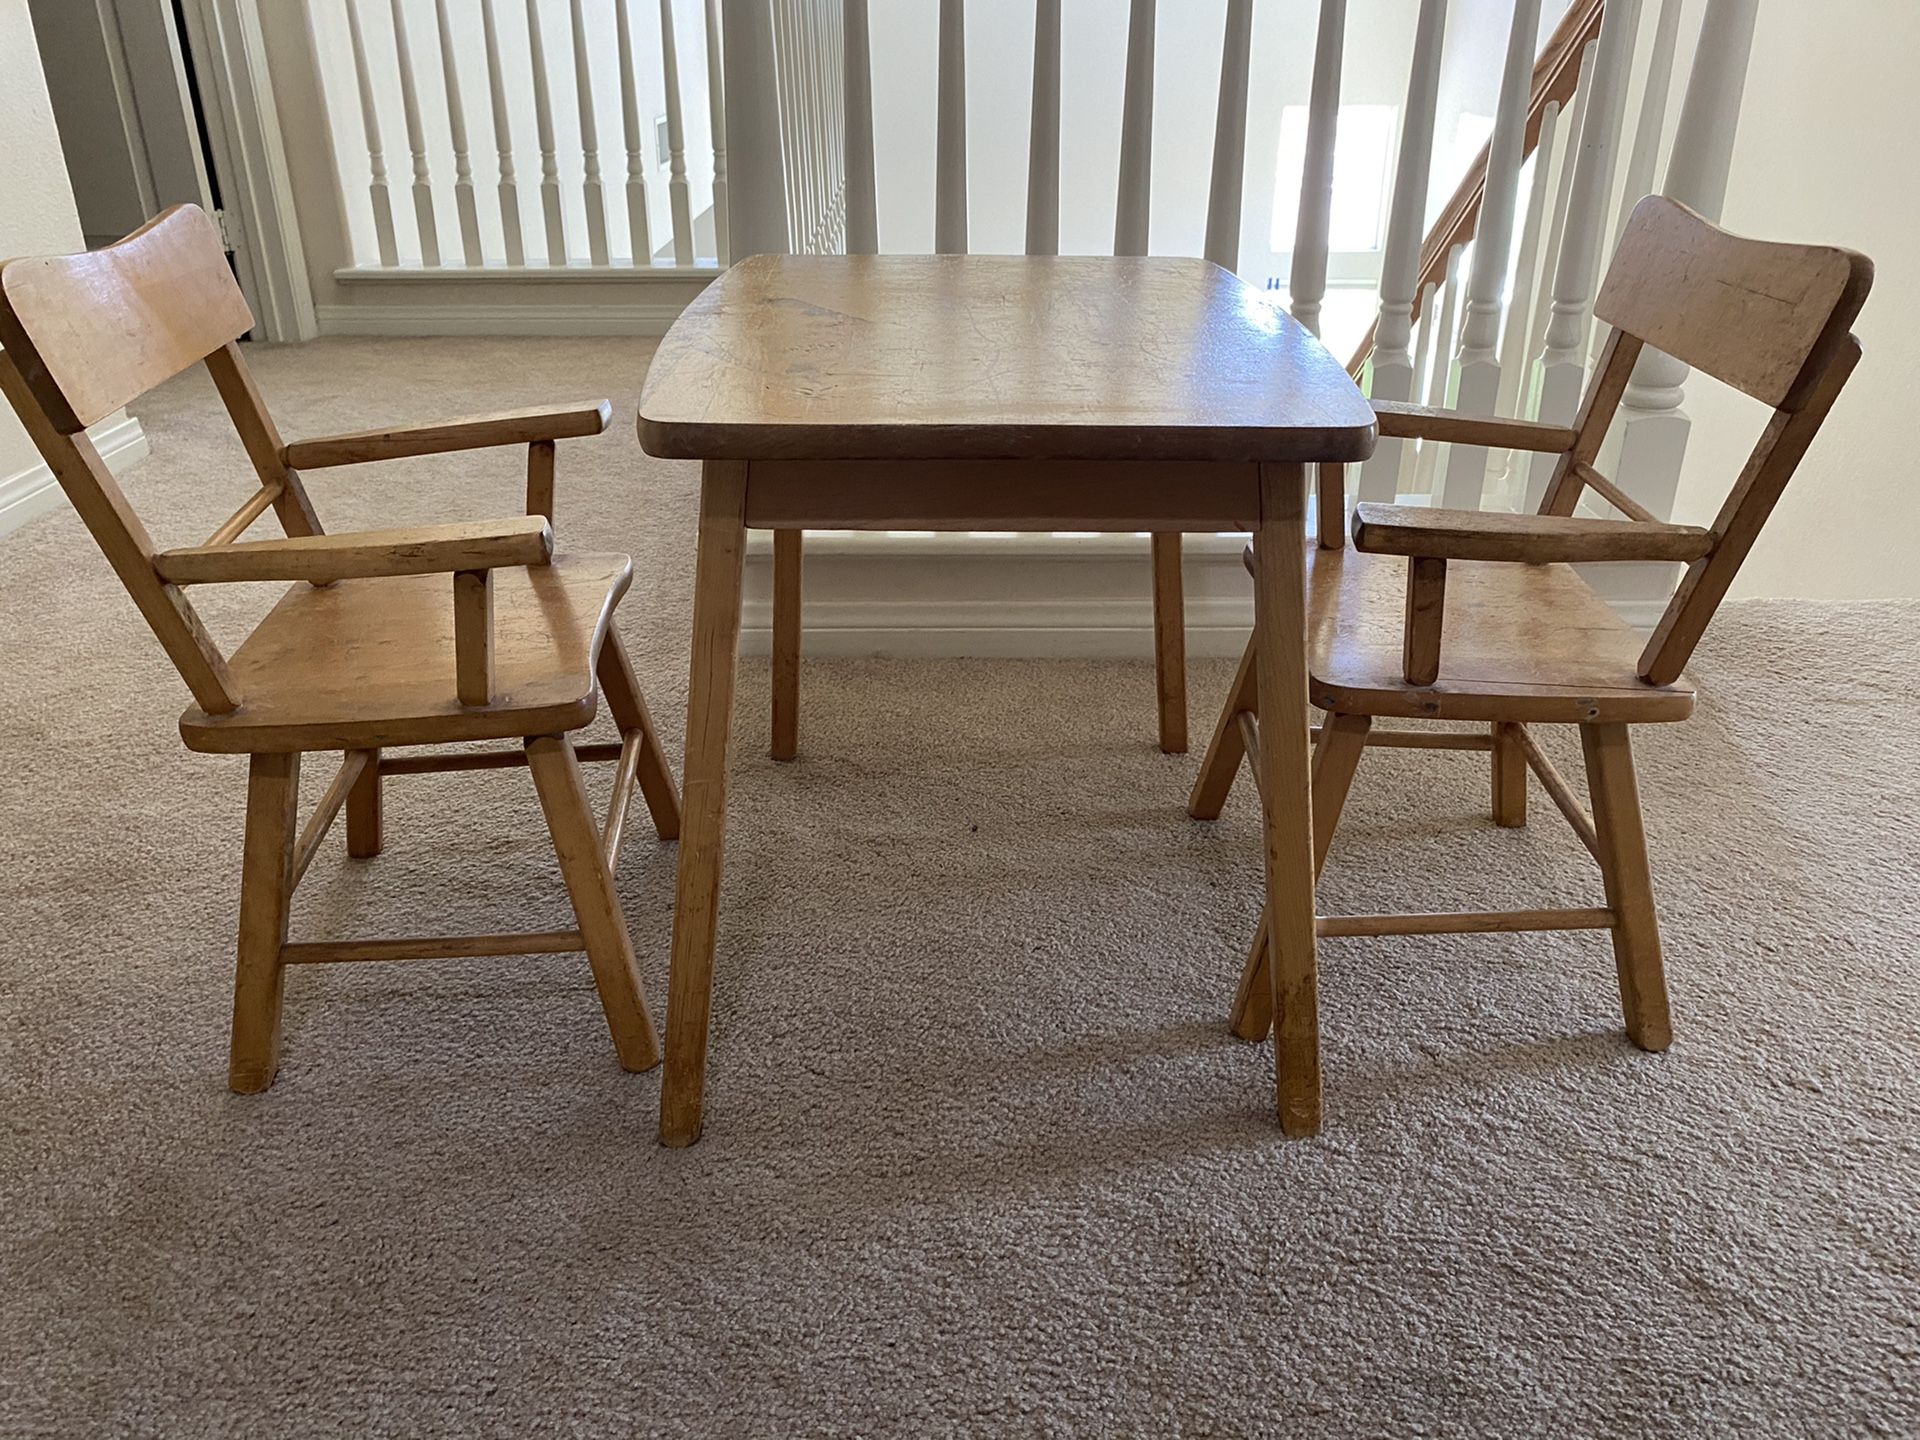 Antique oak hill wood kids desk and chairs